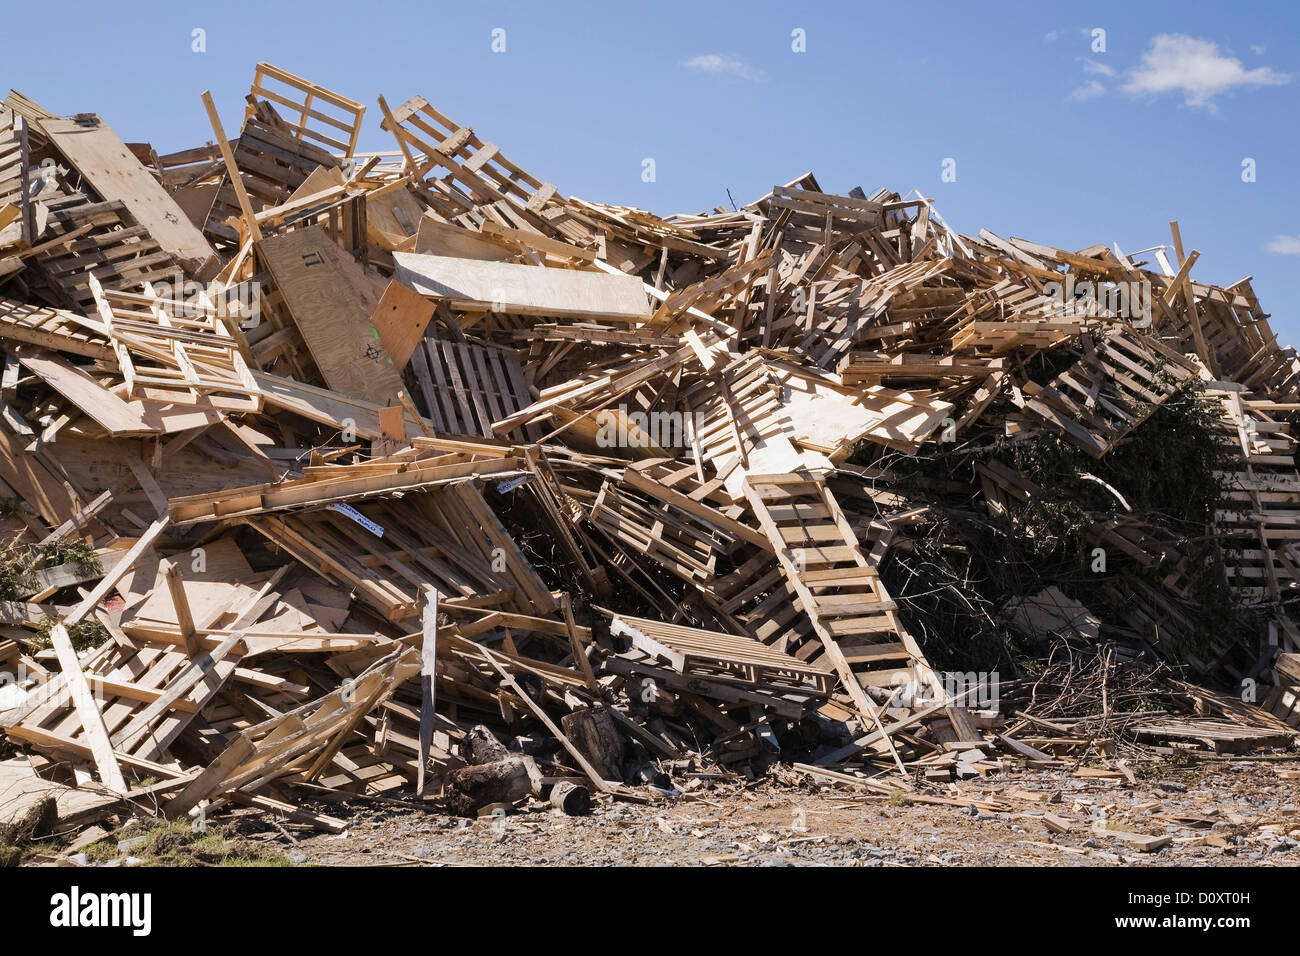 Pile of discarded wood at waste management site Stock Photo